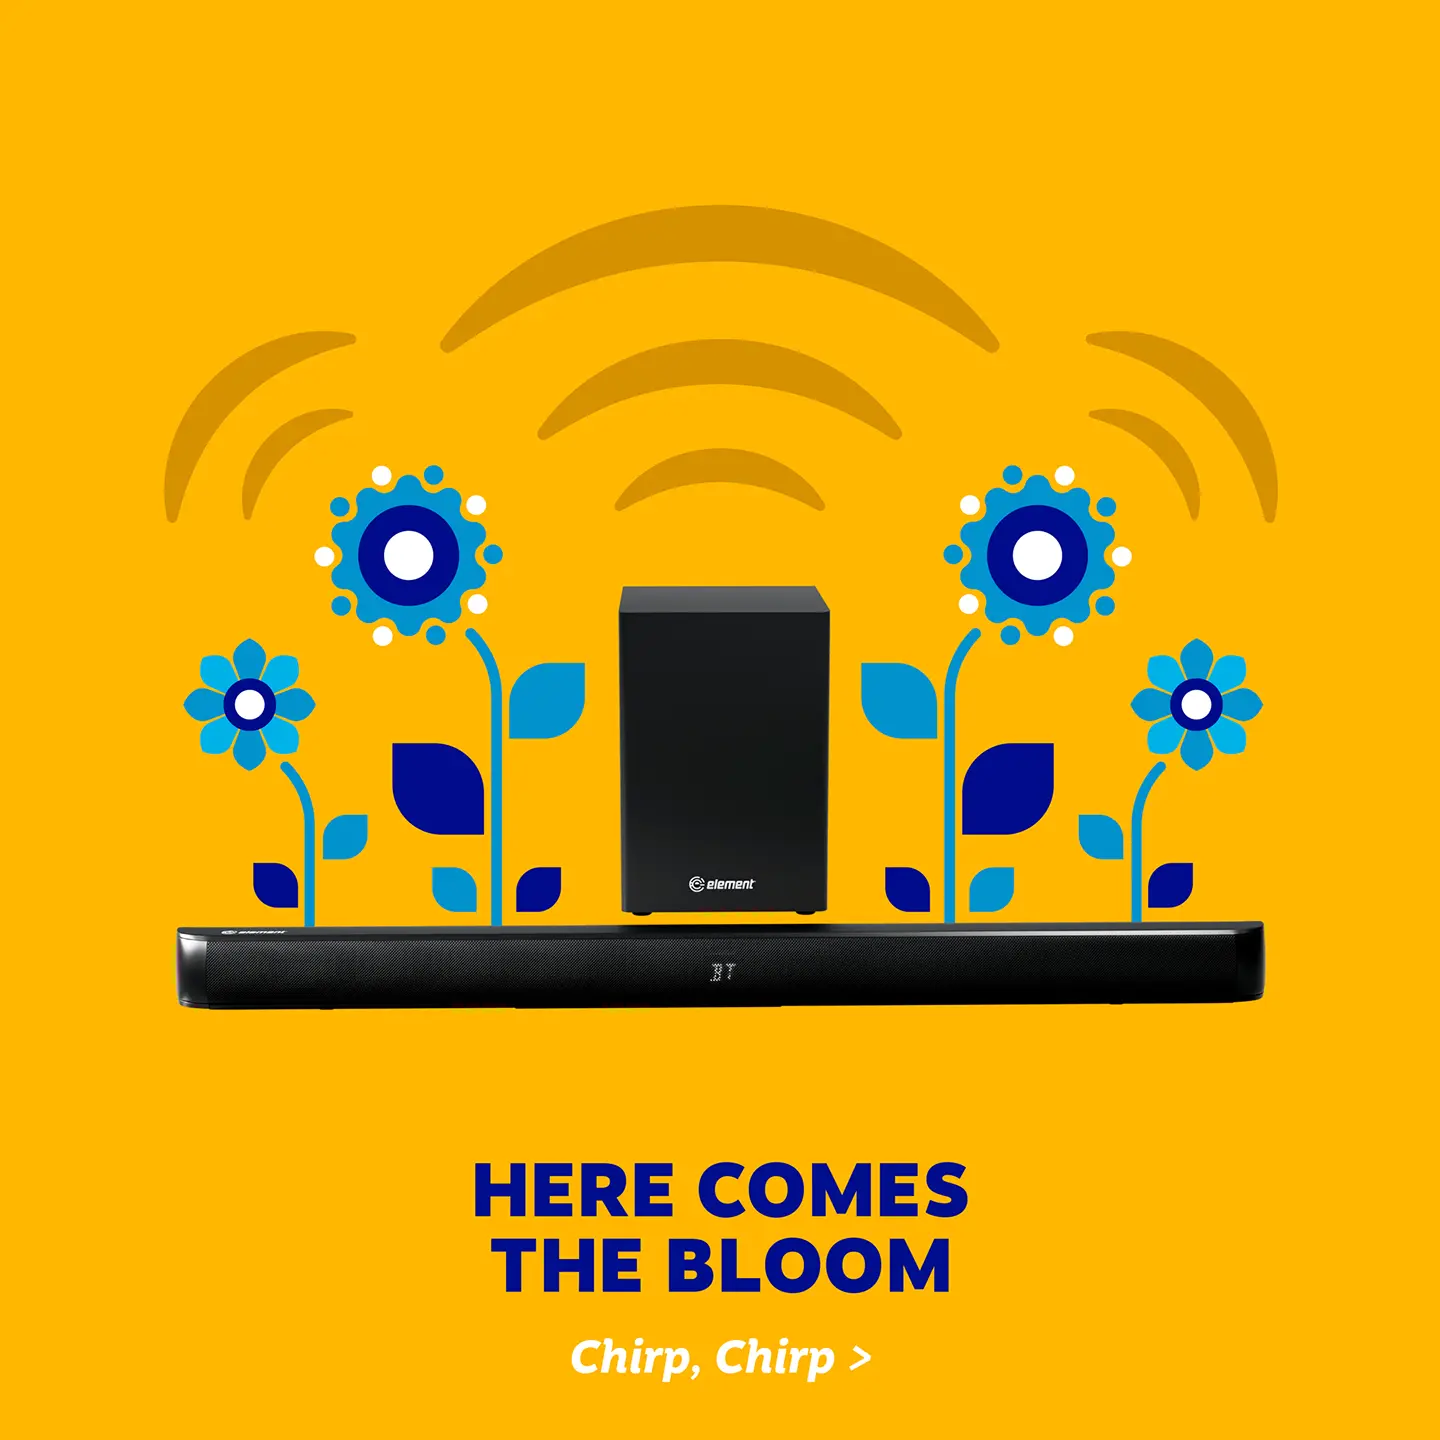 Here comes the bloom - chirp, chirp with an Element sound bar